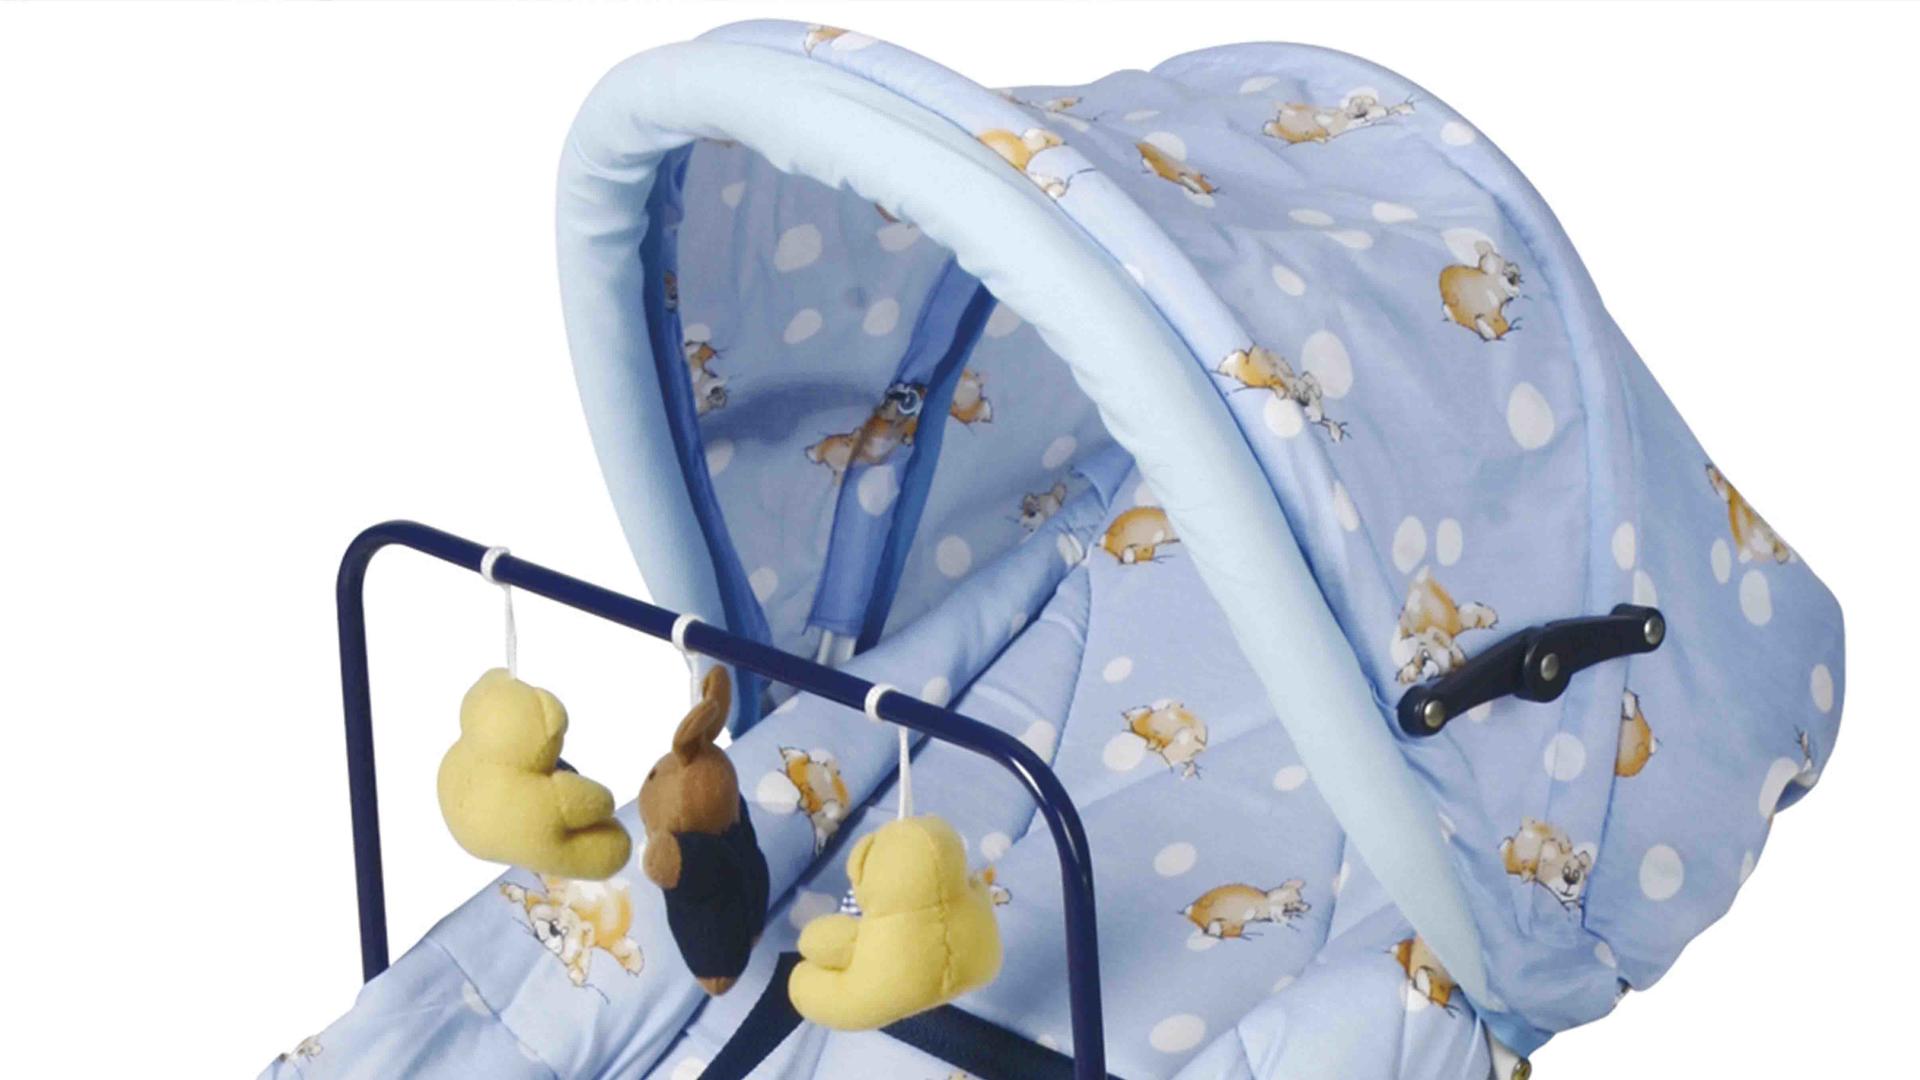 Aoqi portable baby bouncer supplier for infant